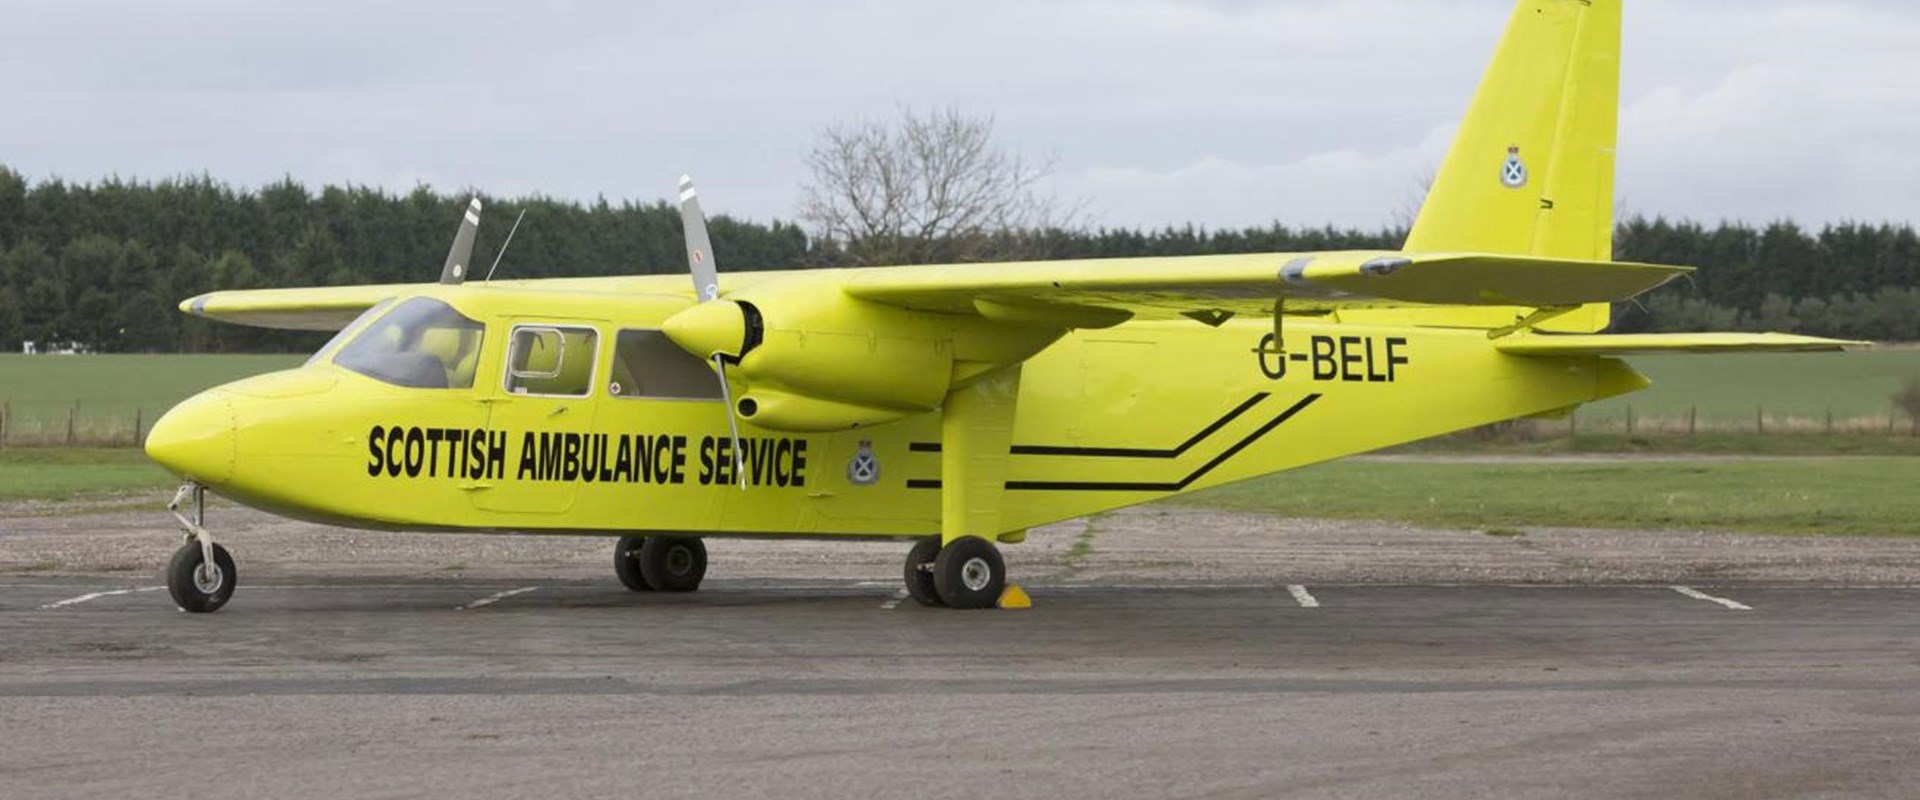 Bright yellow airplane that says 'Scottish Ambulance Service' on the side